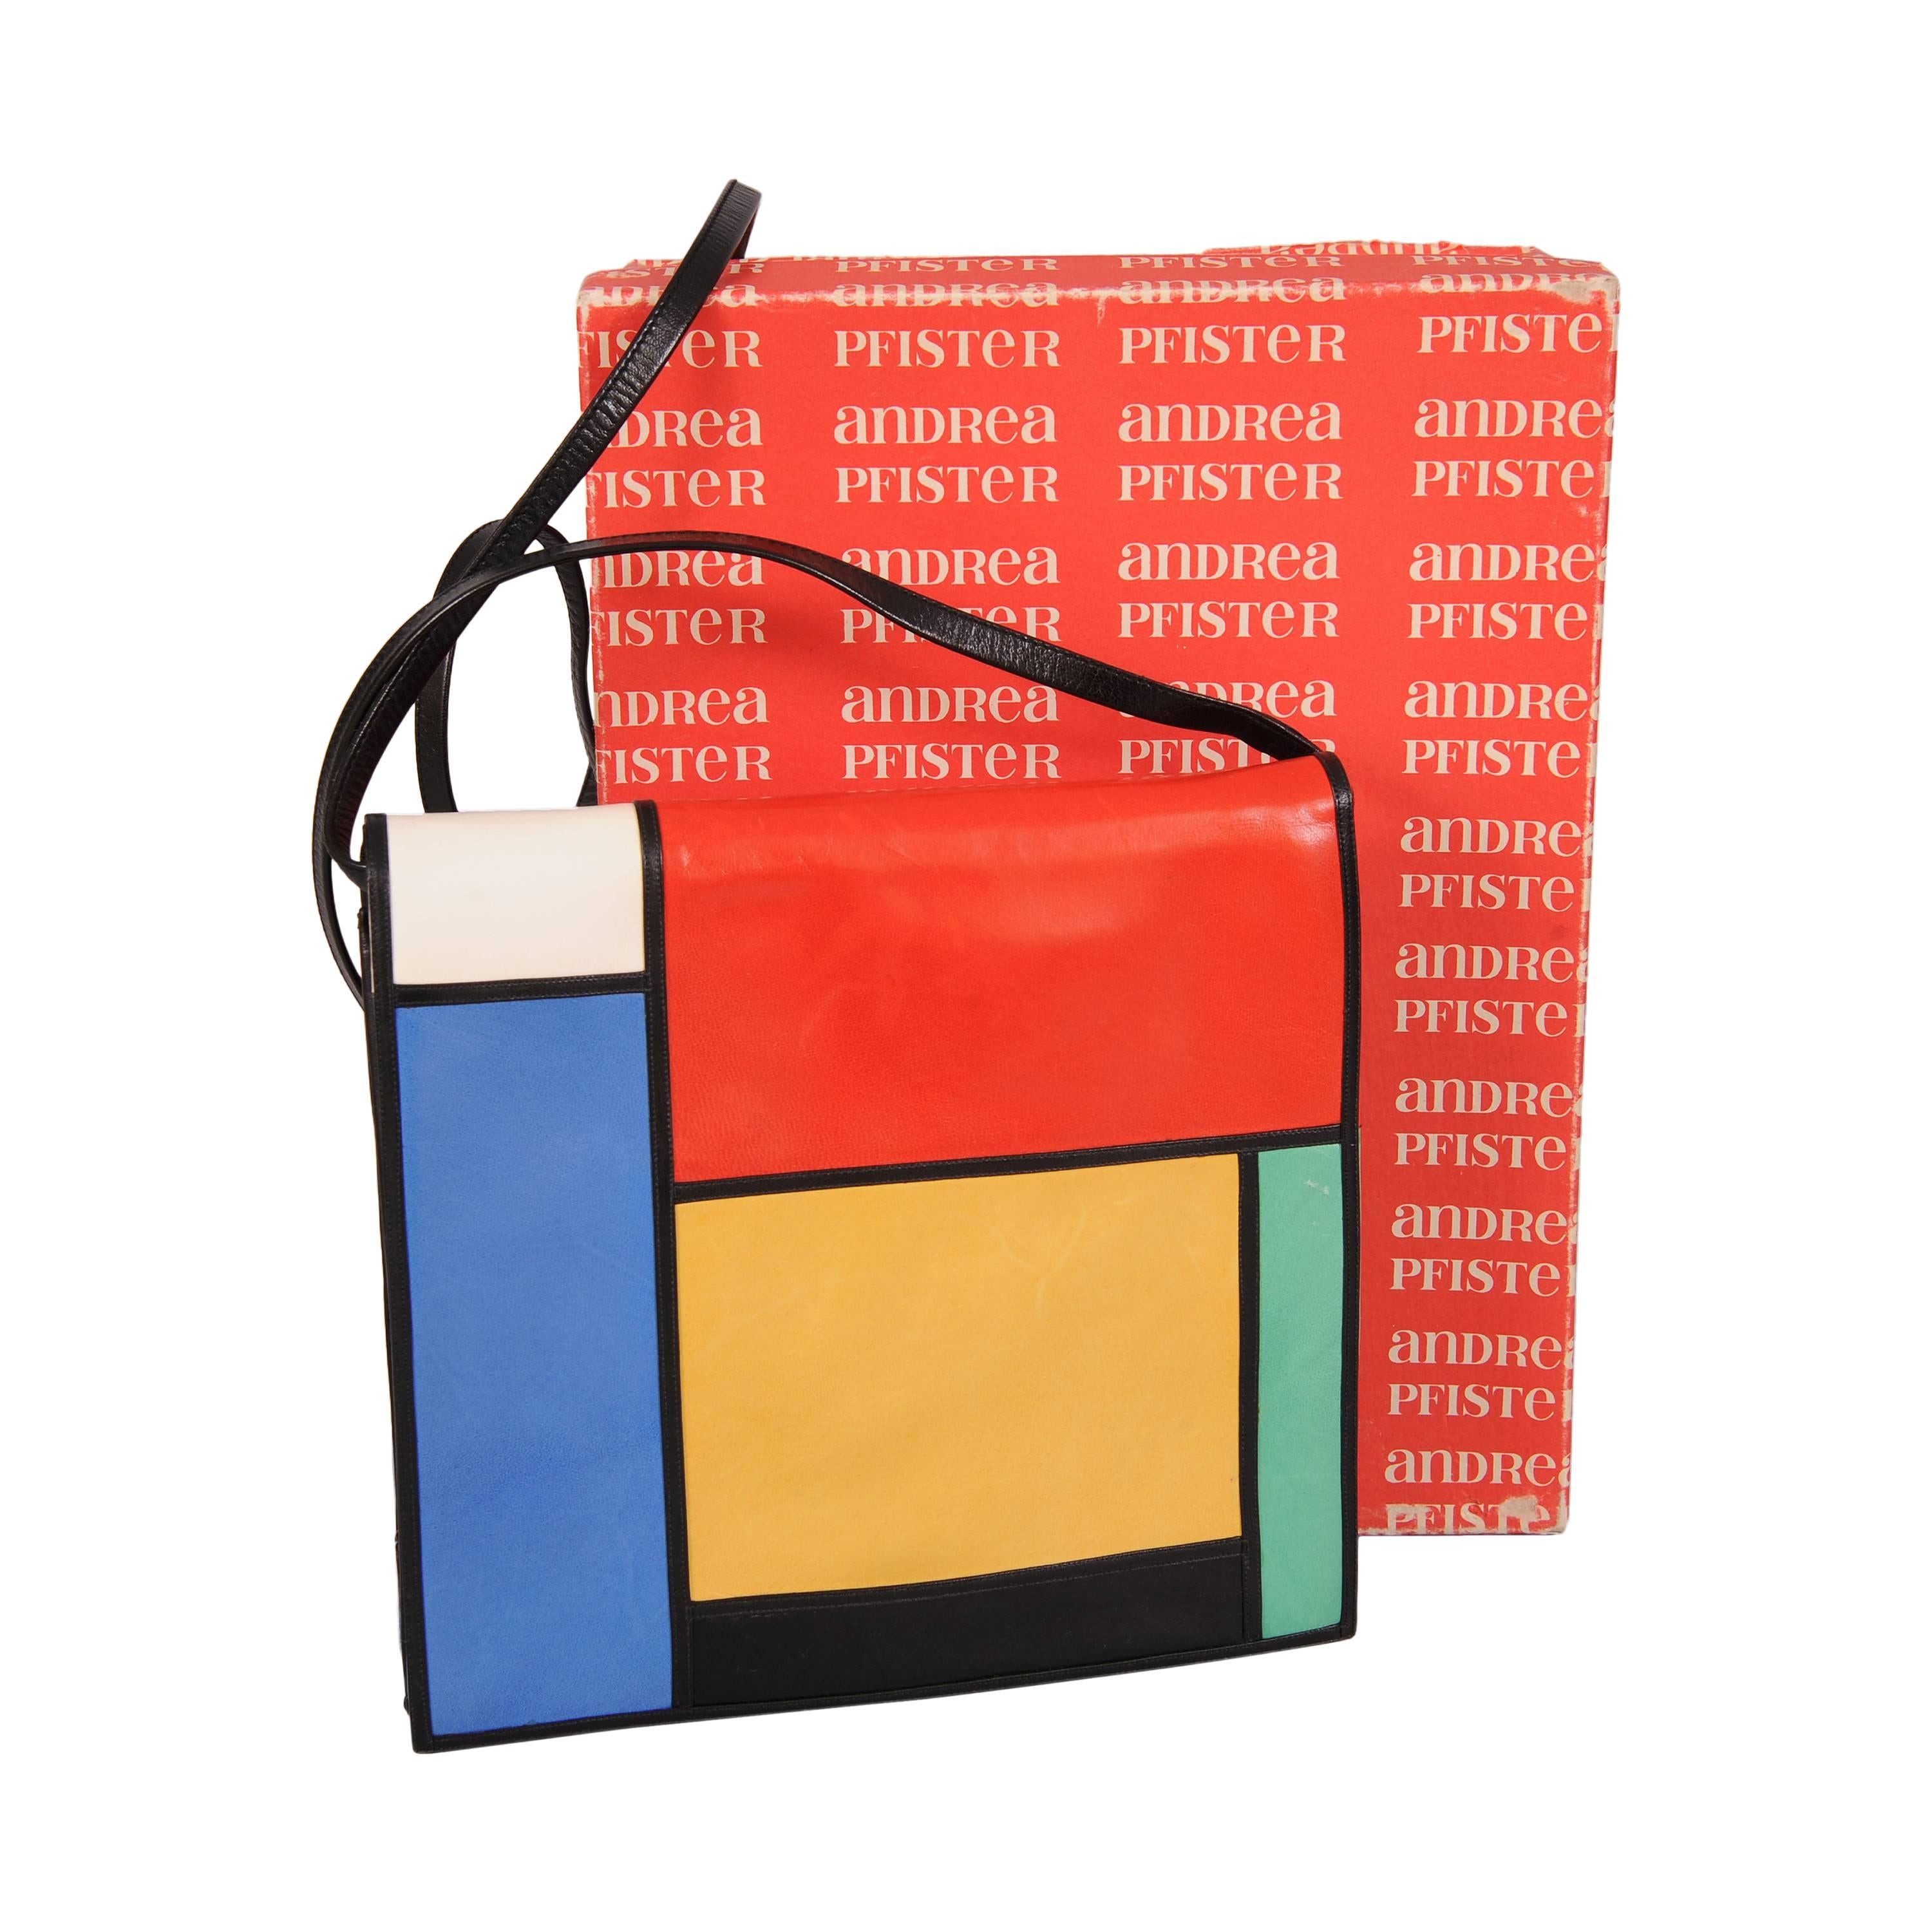 Mondrian Inspired Andrea Pfister Leather Clutch or Crossbody Bag